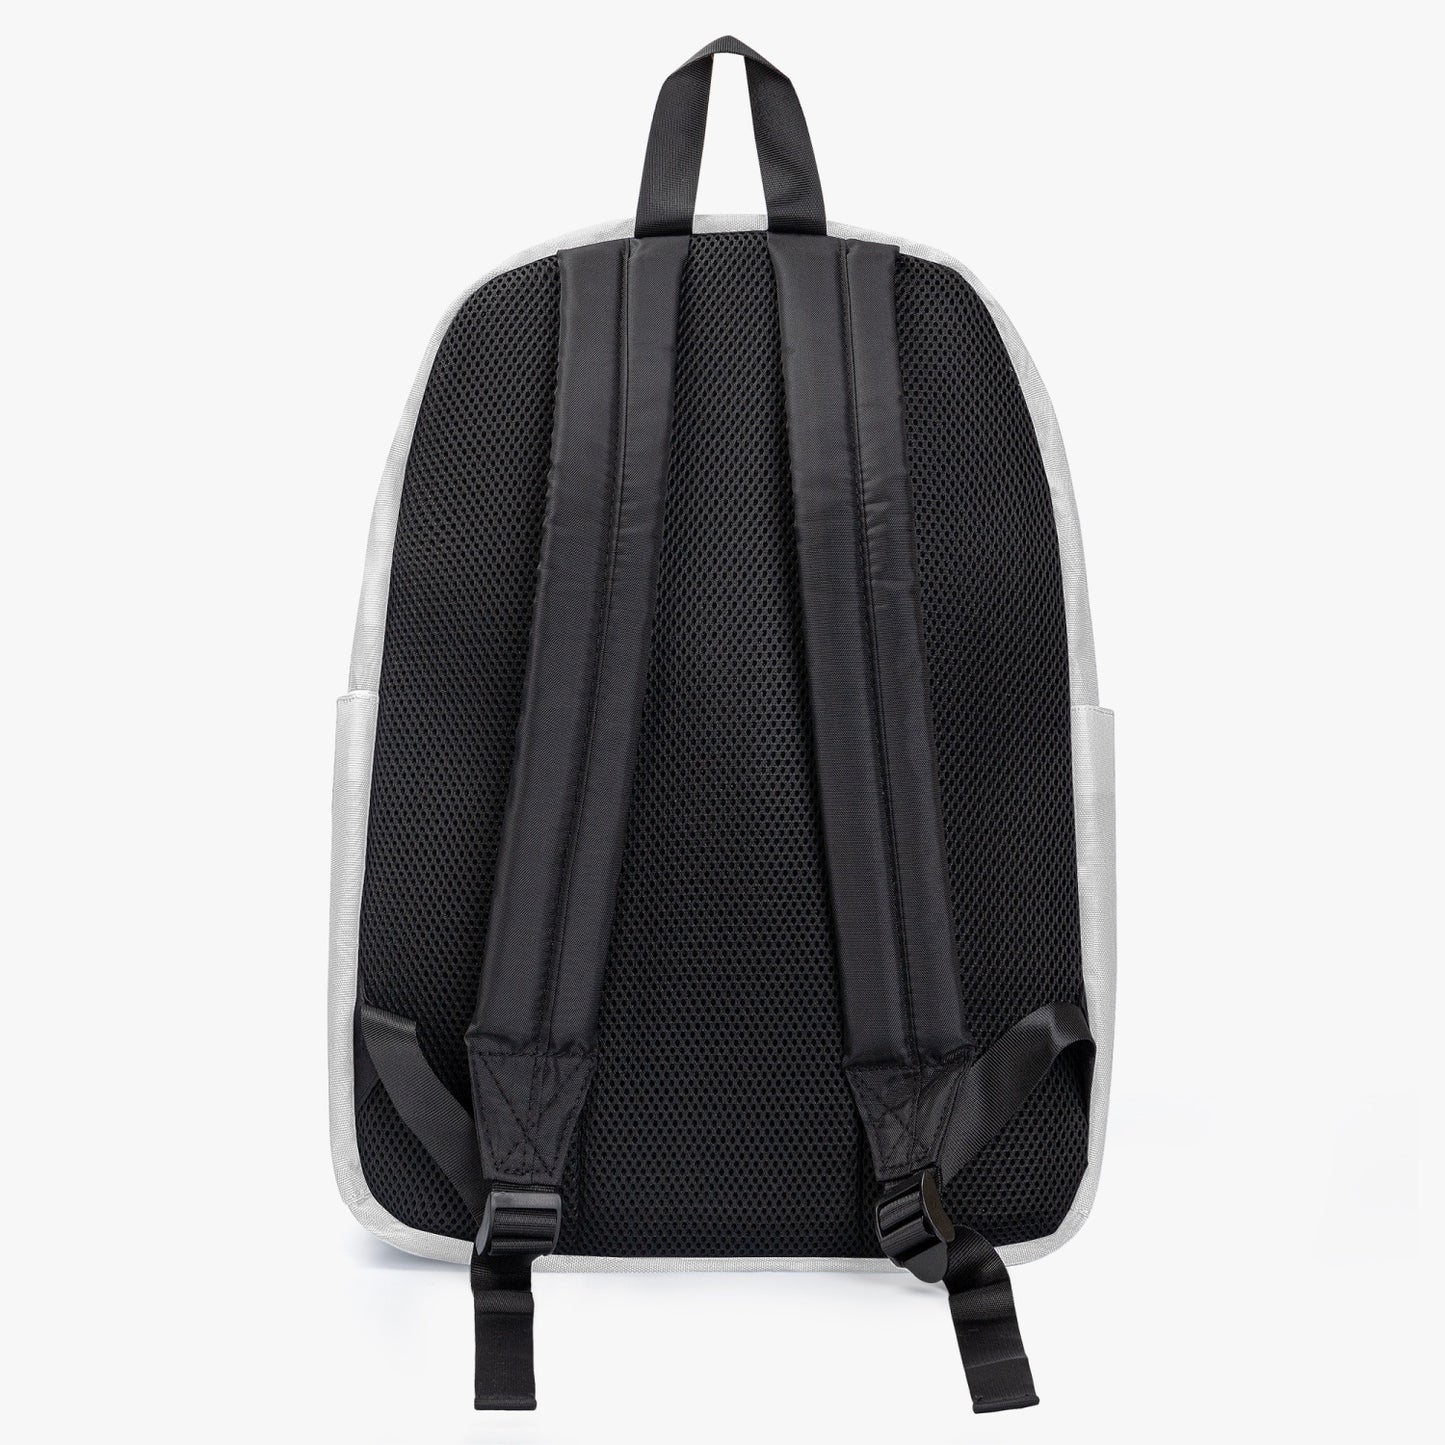 GAMER All-over-print Canvas Backpack